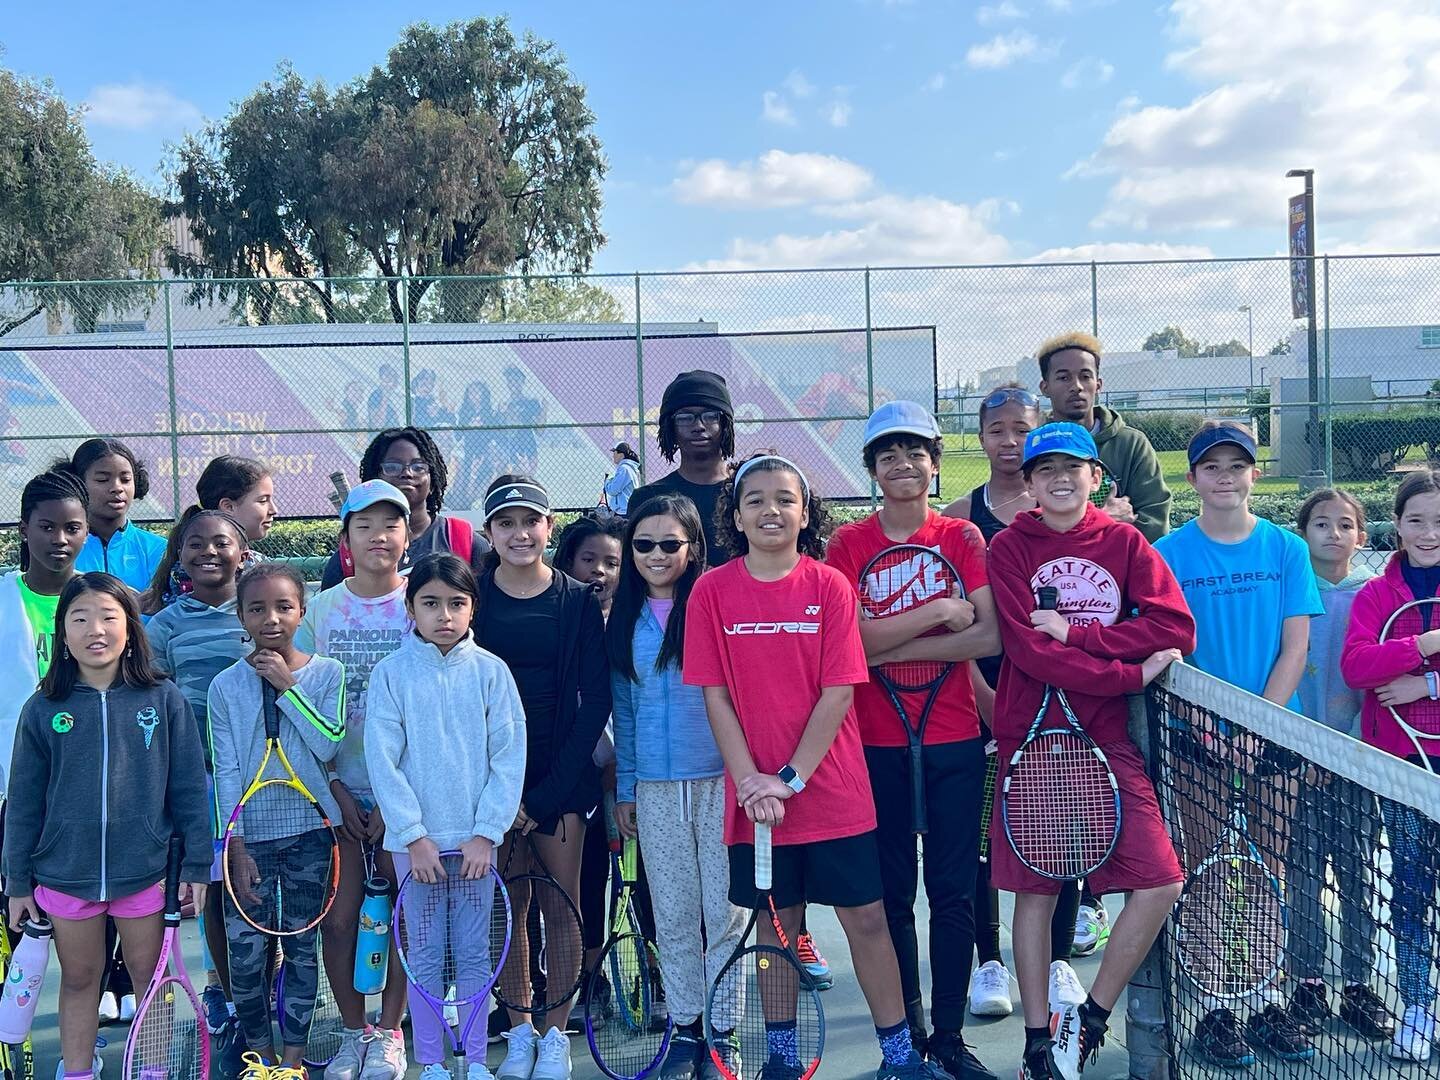 Our JTT tryouts were a blast this Saturday! 🎾✌️ We&rsquo;re so excited to see what the 2023 Spring Season has in-store for the BREAKERS! 🏆 Fall tryouts will take place August/September, so please make sure you stay connected for details. 

#SoCalTe